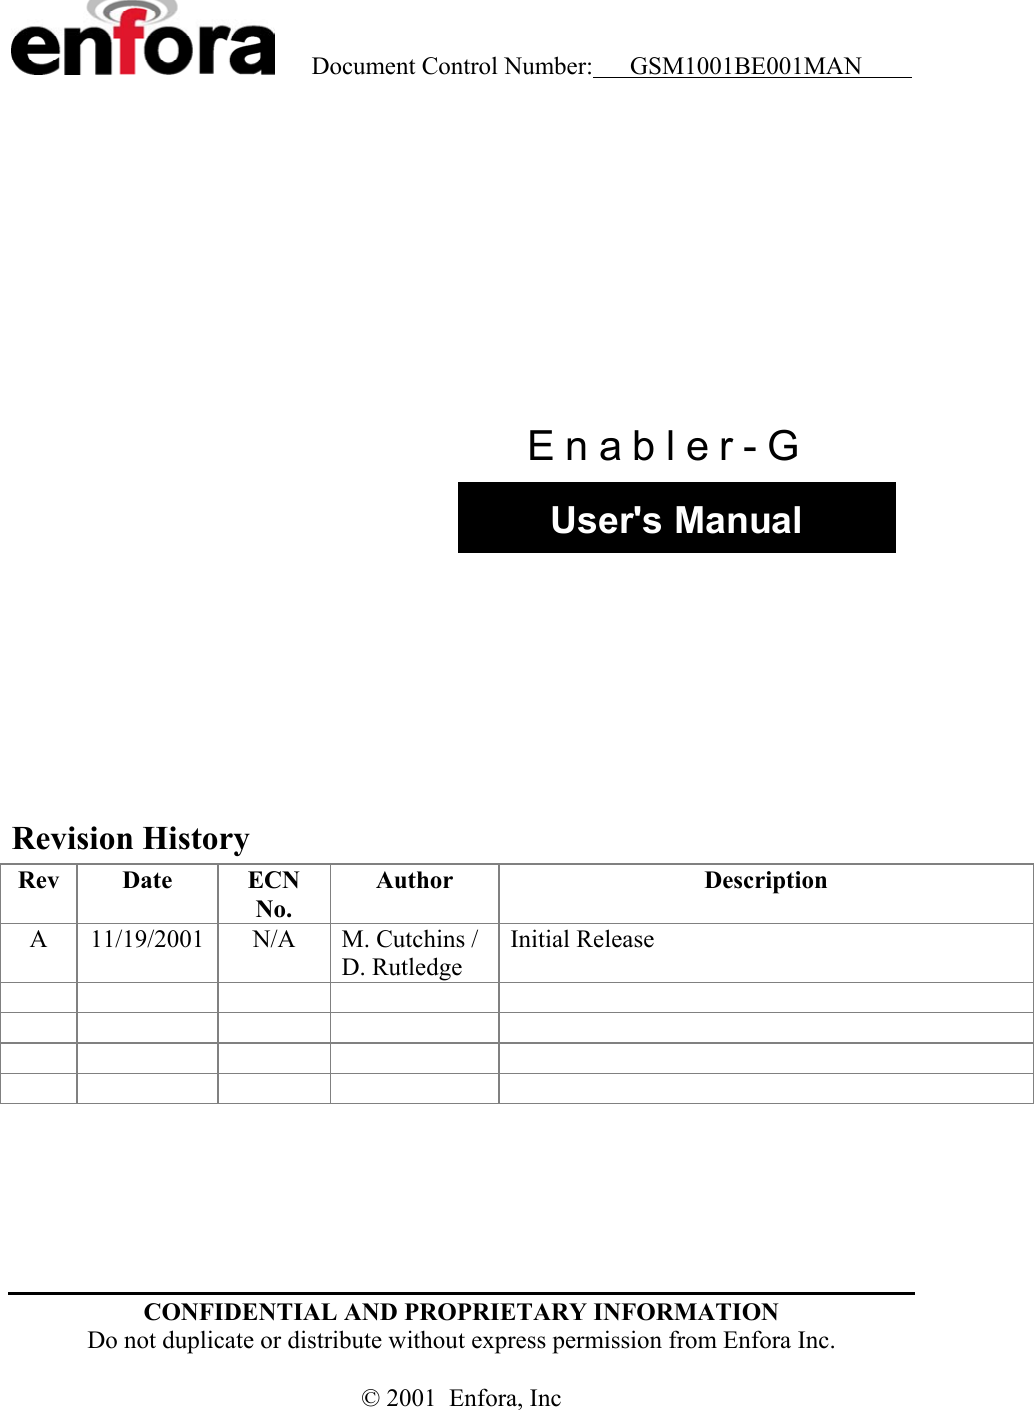    Document Control Number:     GSM1001BE001MAN           rr  User&apos;s Manual Enabler-G           Revision History Rev  Date  ECN No. Author  Description A  11/19/2001  N/A  M. Cutchins / D. Rutledge Initial Release                                 CONFIDENTIAL AND PROPRIETARY INFORMATION  Do not duplicate or distribute without express permission from Enfora Inc.  © 2001  Enfora, Inc 